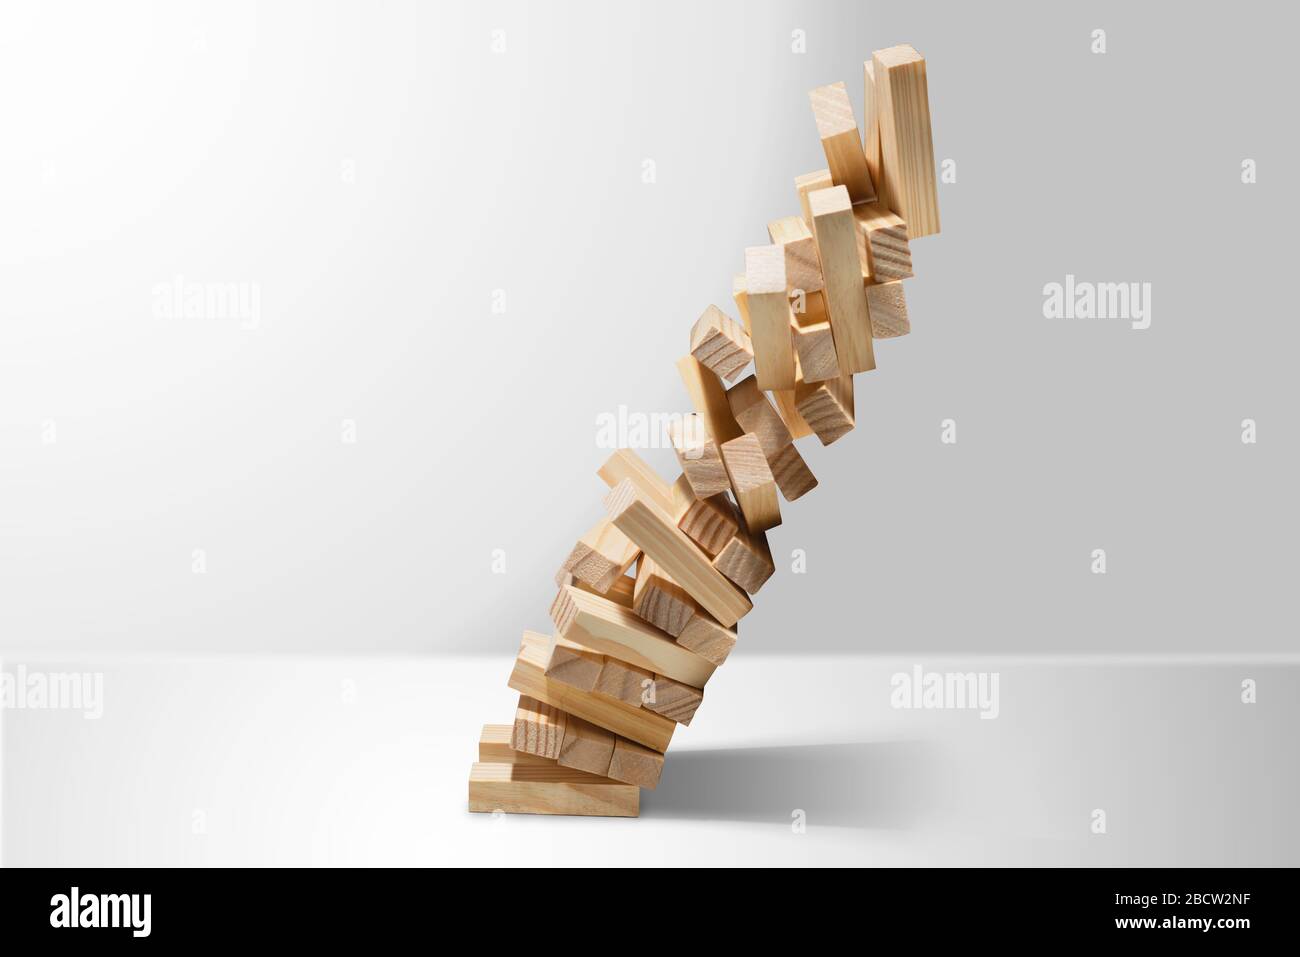 Wooden block tower game collapses isolated on white background with copy space Stock Photo